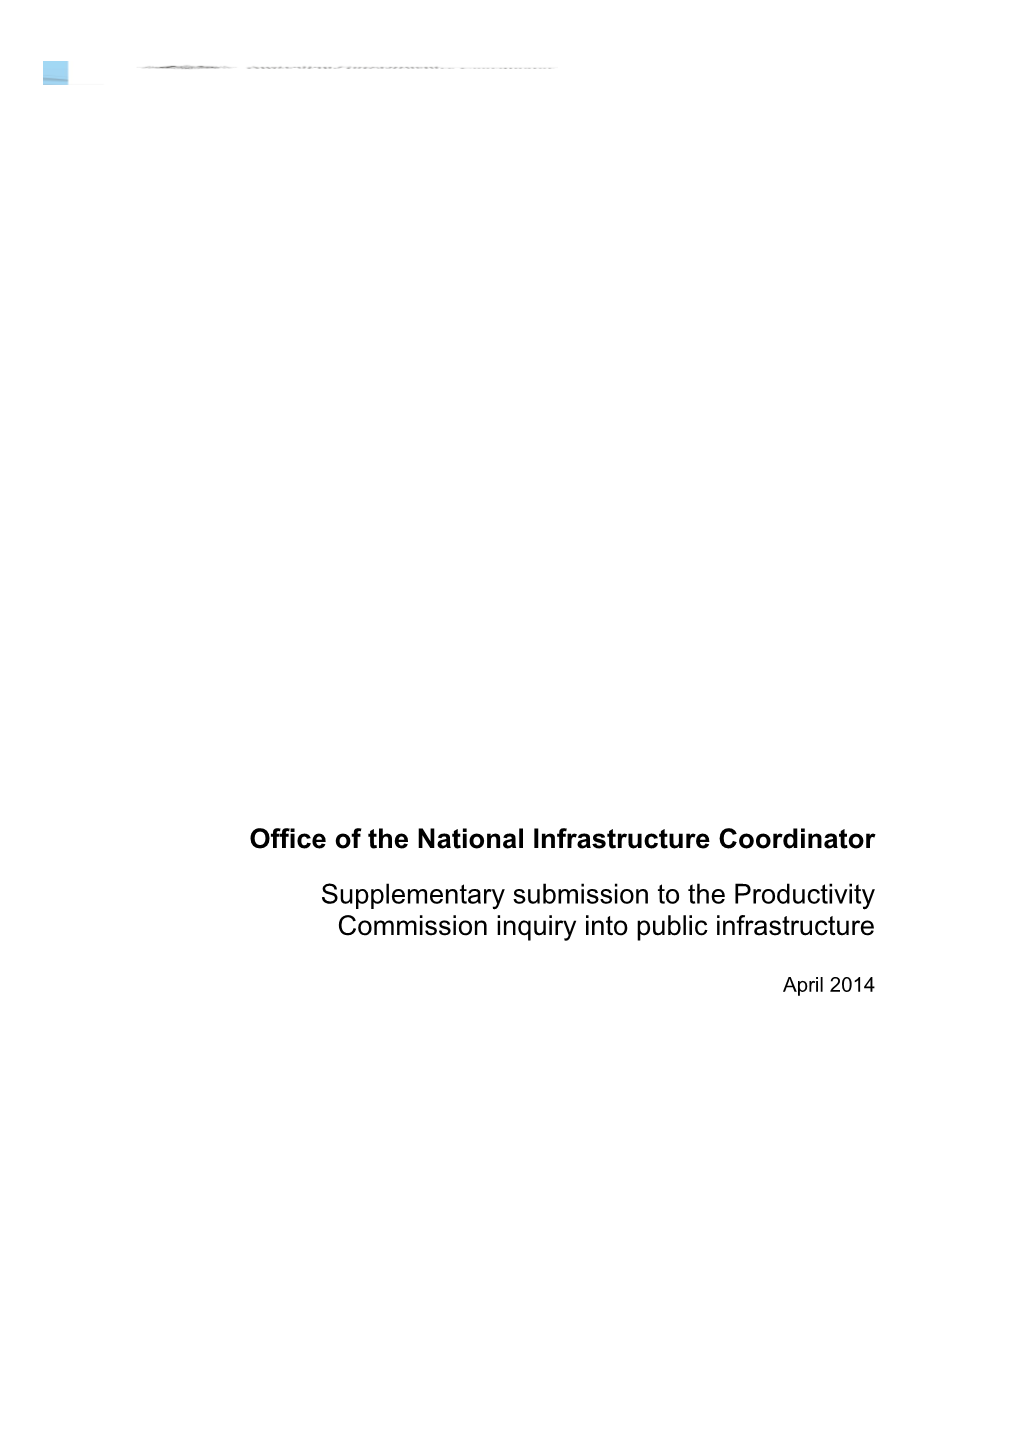 Submission DR185 - Office of the Infrastructure Coordinator - Public Infrastructure - Public